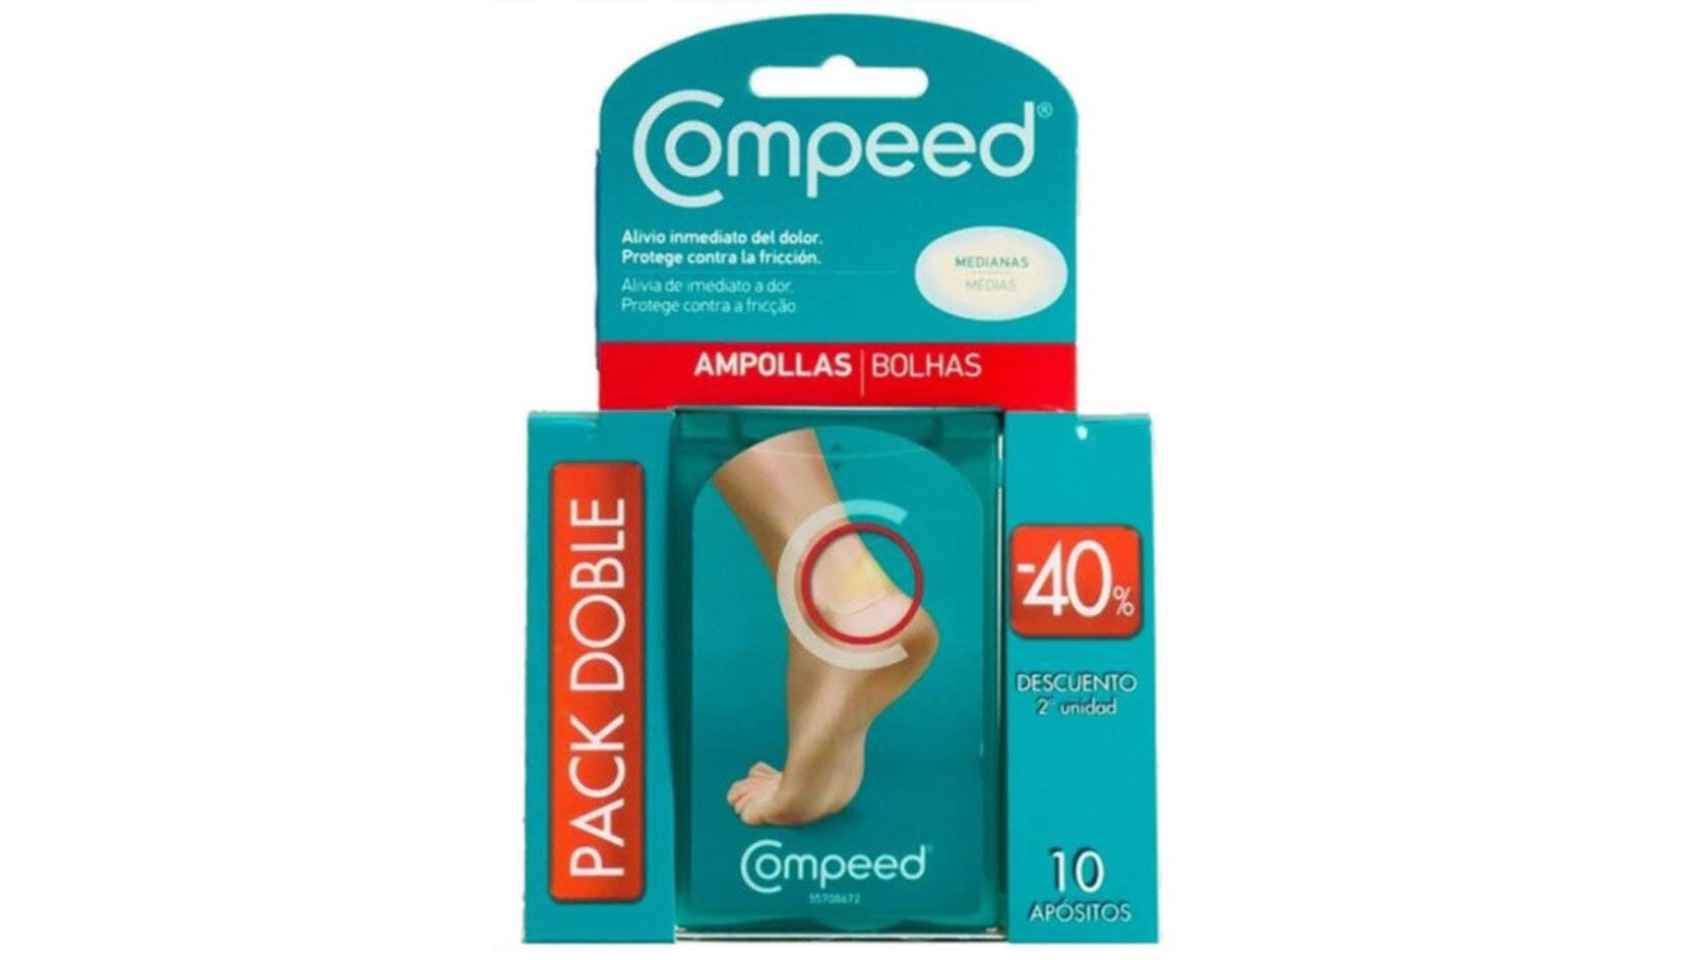 Compeed ampollas